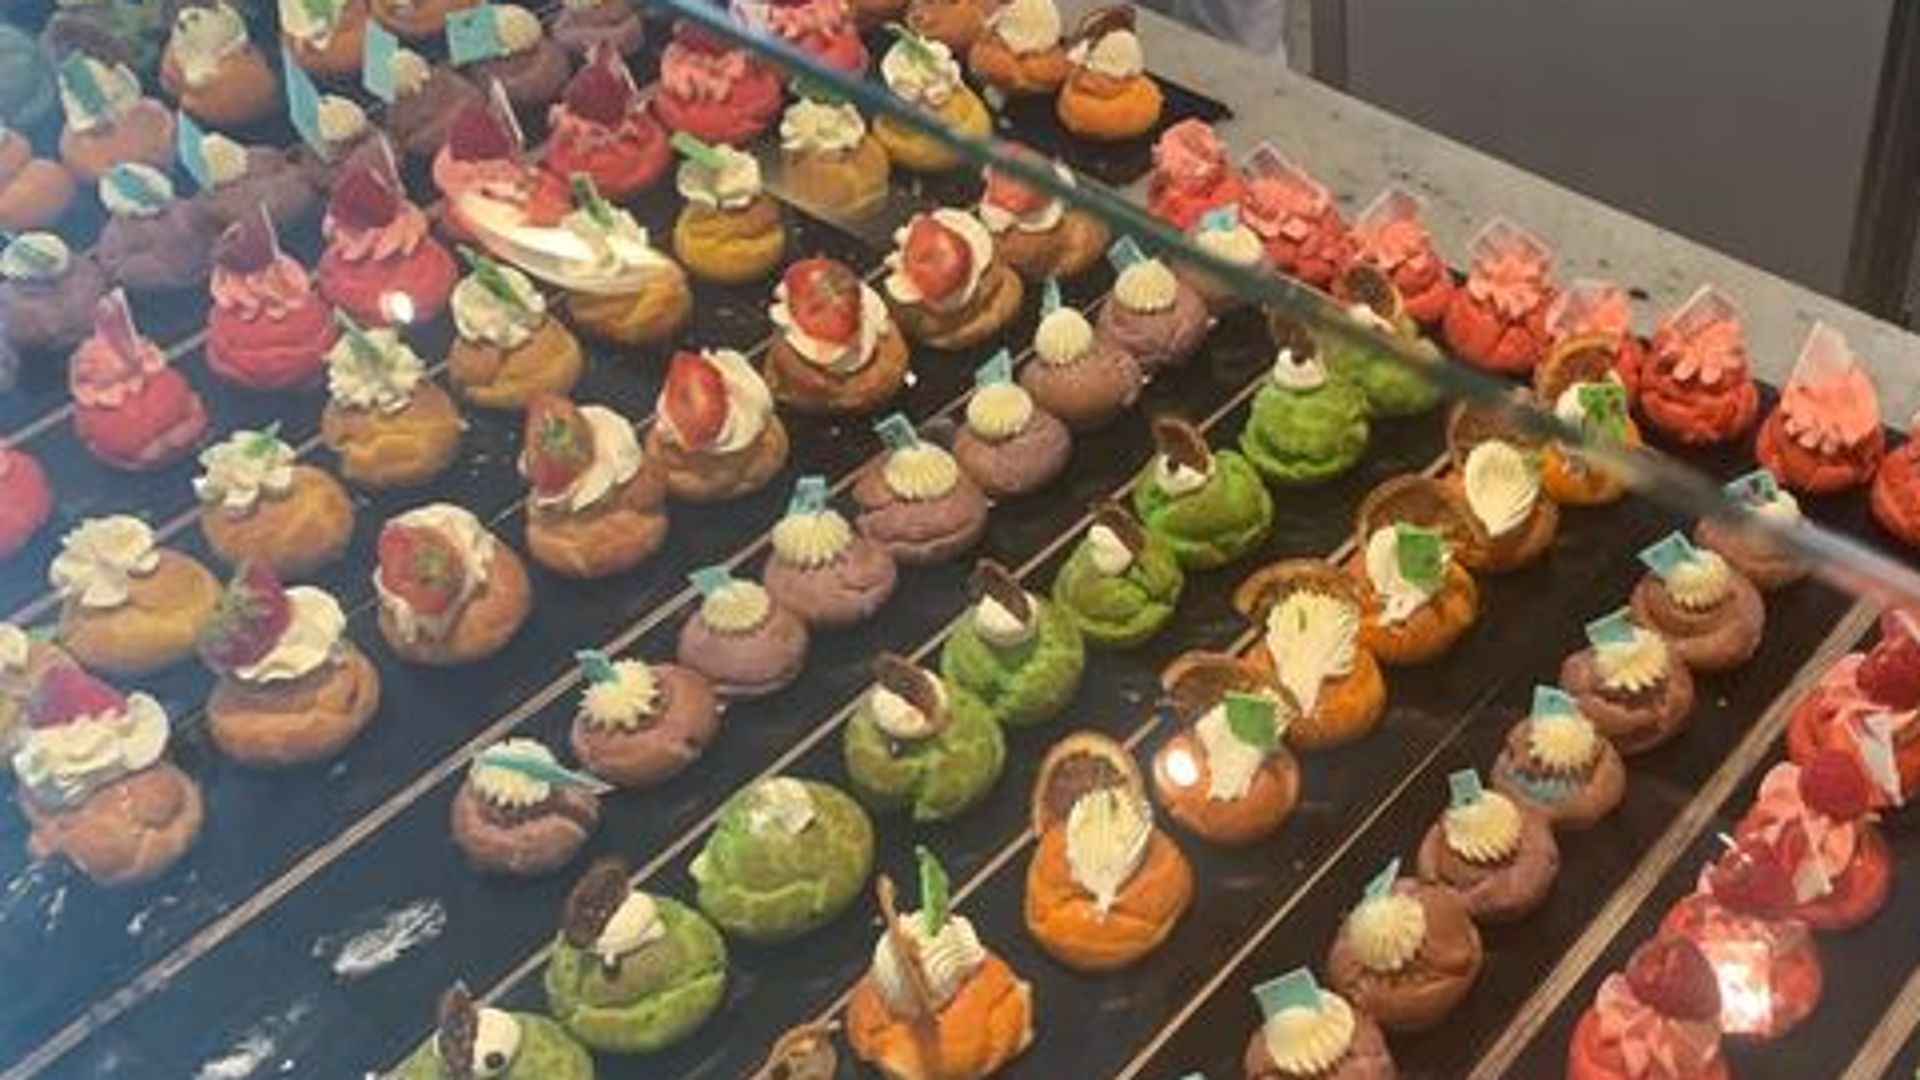 A selection of delicious cakes on board